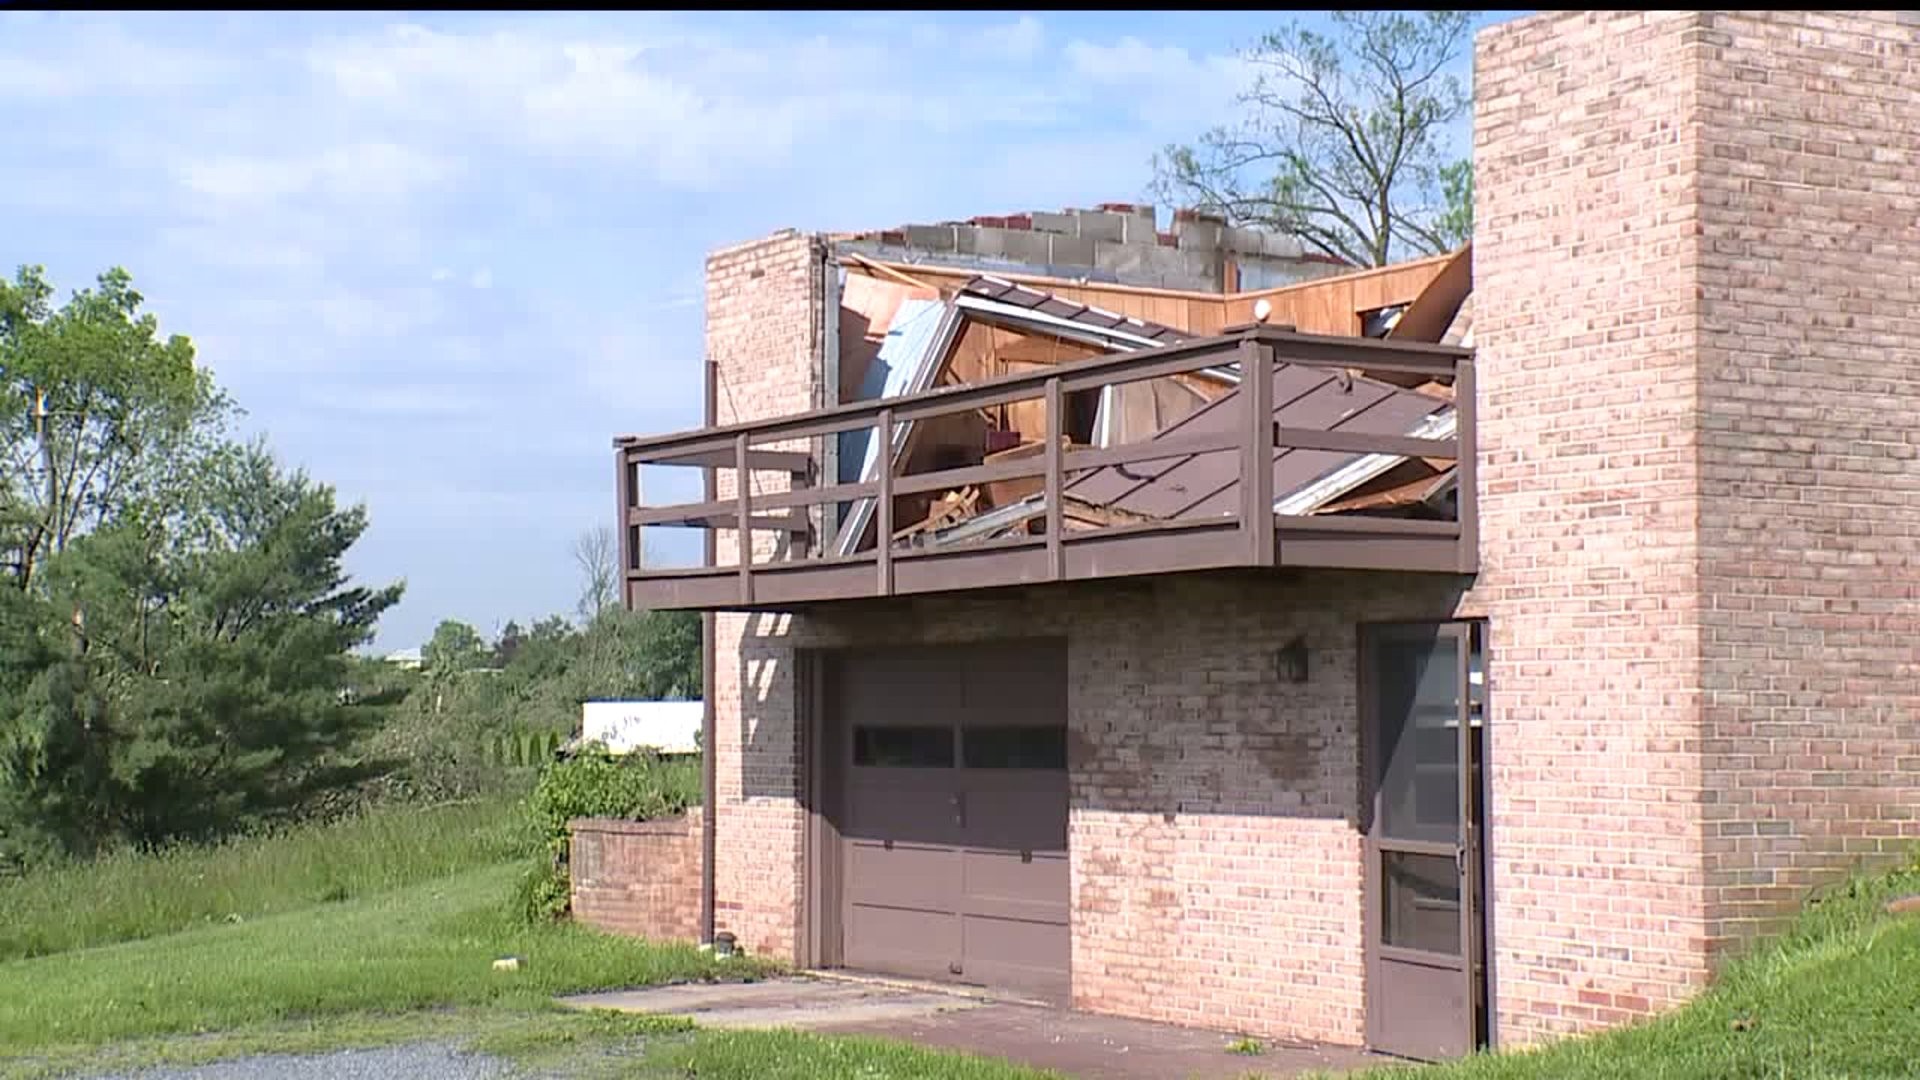 West Cocalico Township neighbors repair storm damage